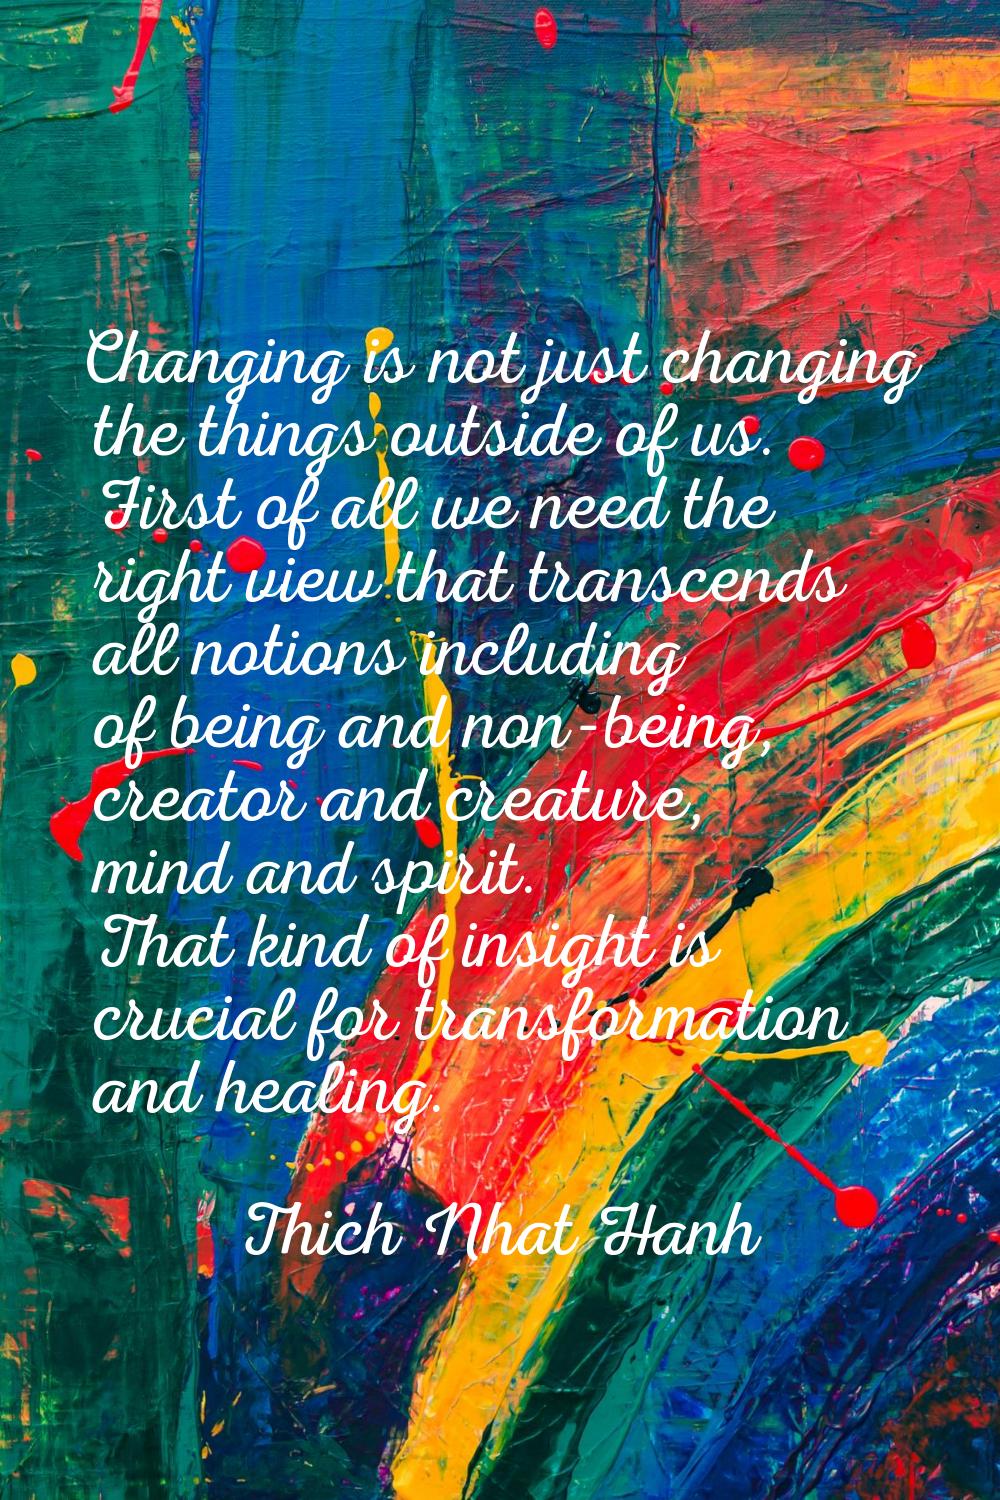 Changing is not just changing the things outside of us. First of all we need the right view that tr